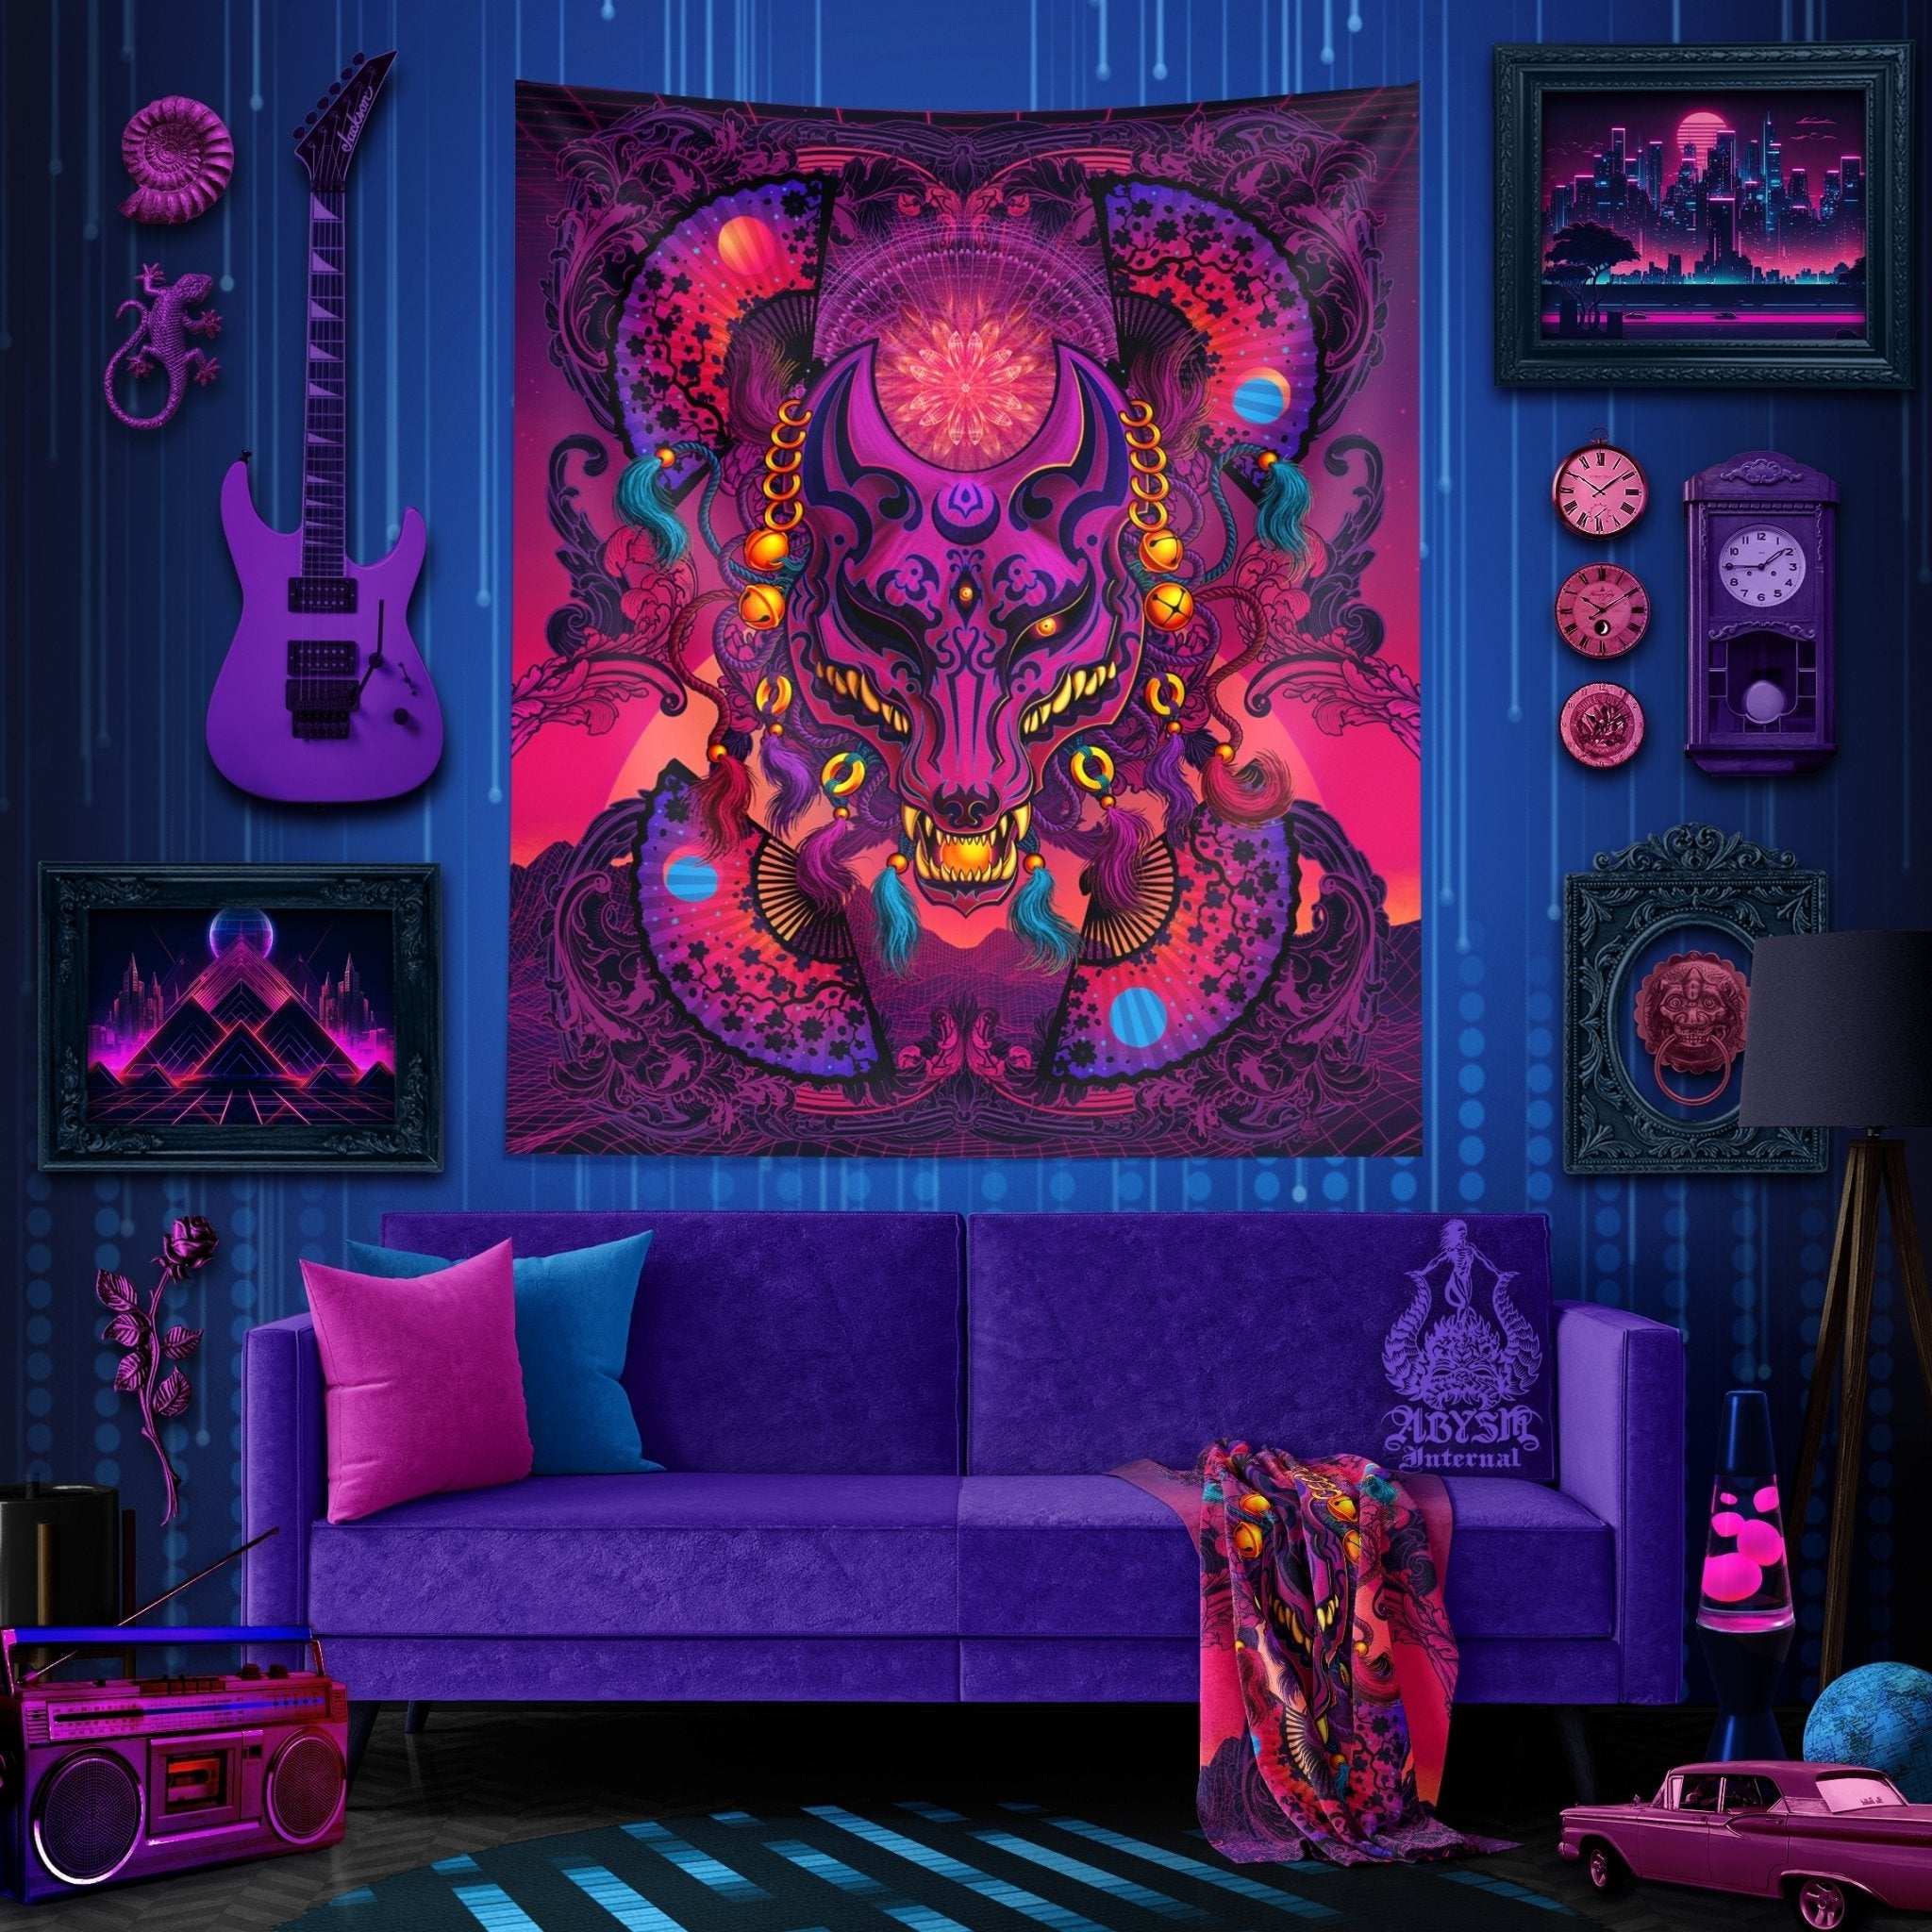 Japanese Vaporwave Tapestry, Synthwave Wall Hanging, Retrowave 80s Home Decor, Anime and Gamer Gift, Psychedelic Art Print, Eclectic and Funky - Kitsune - Abysm Internal